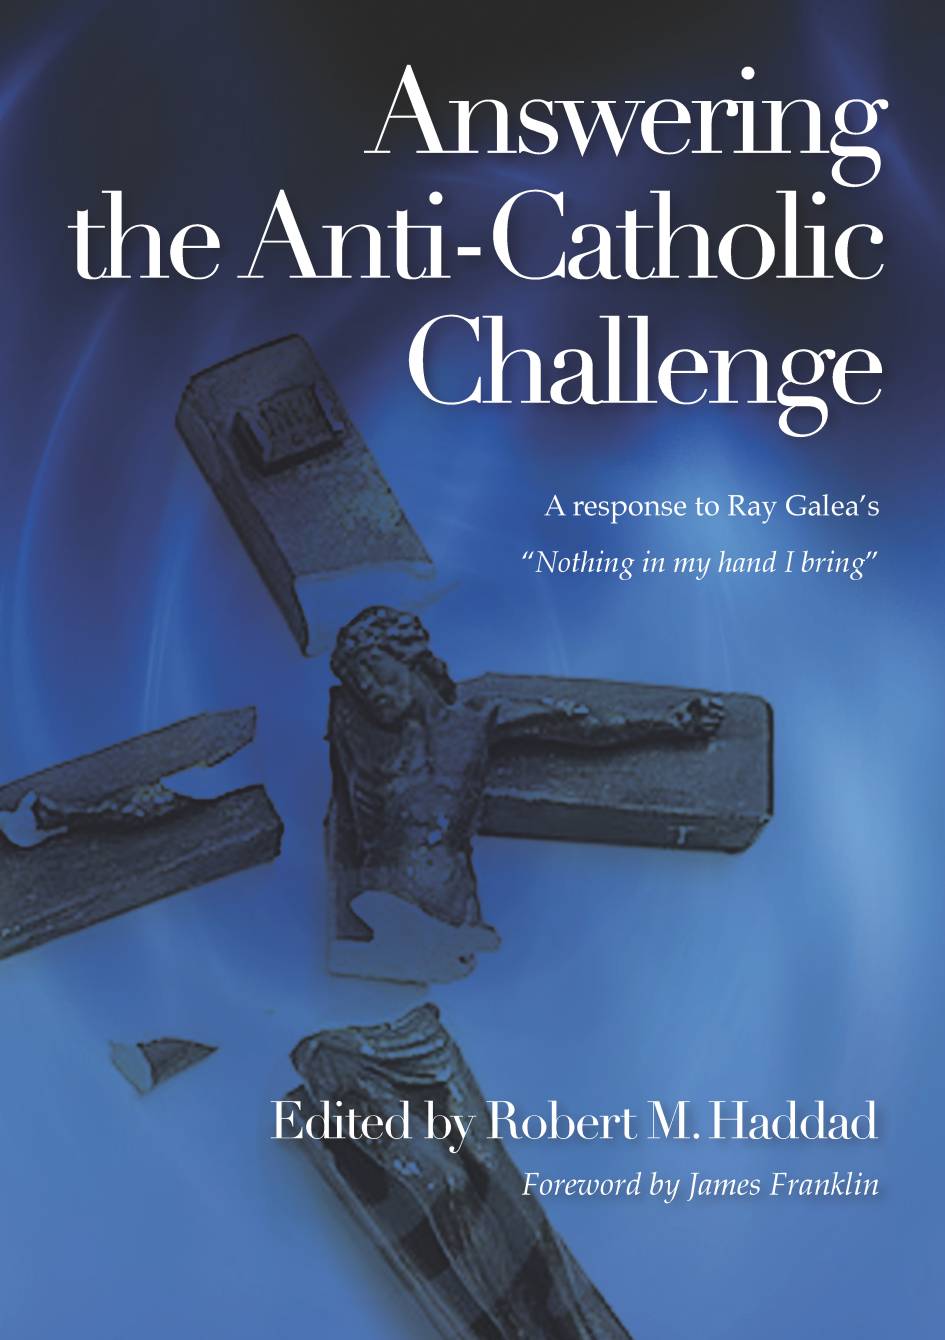 Answering the Anti-Catholic Challenge: a Response to Ray Galea's "Nothing in My Hand I Bring" / Edited by Robert M. Haddad